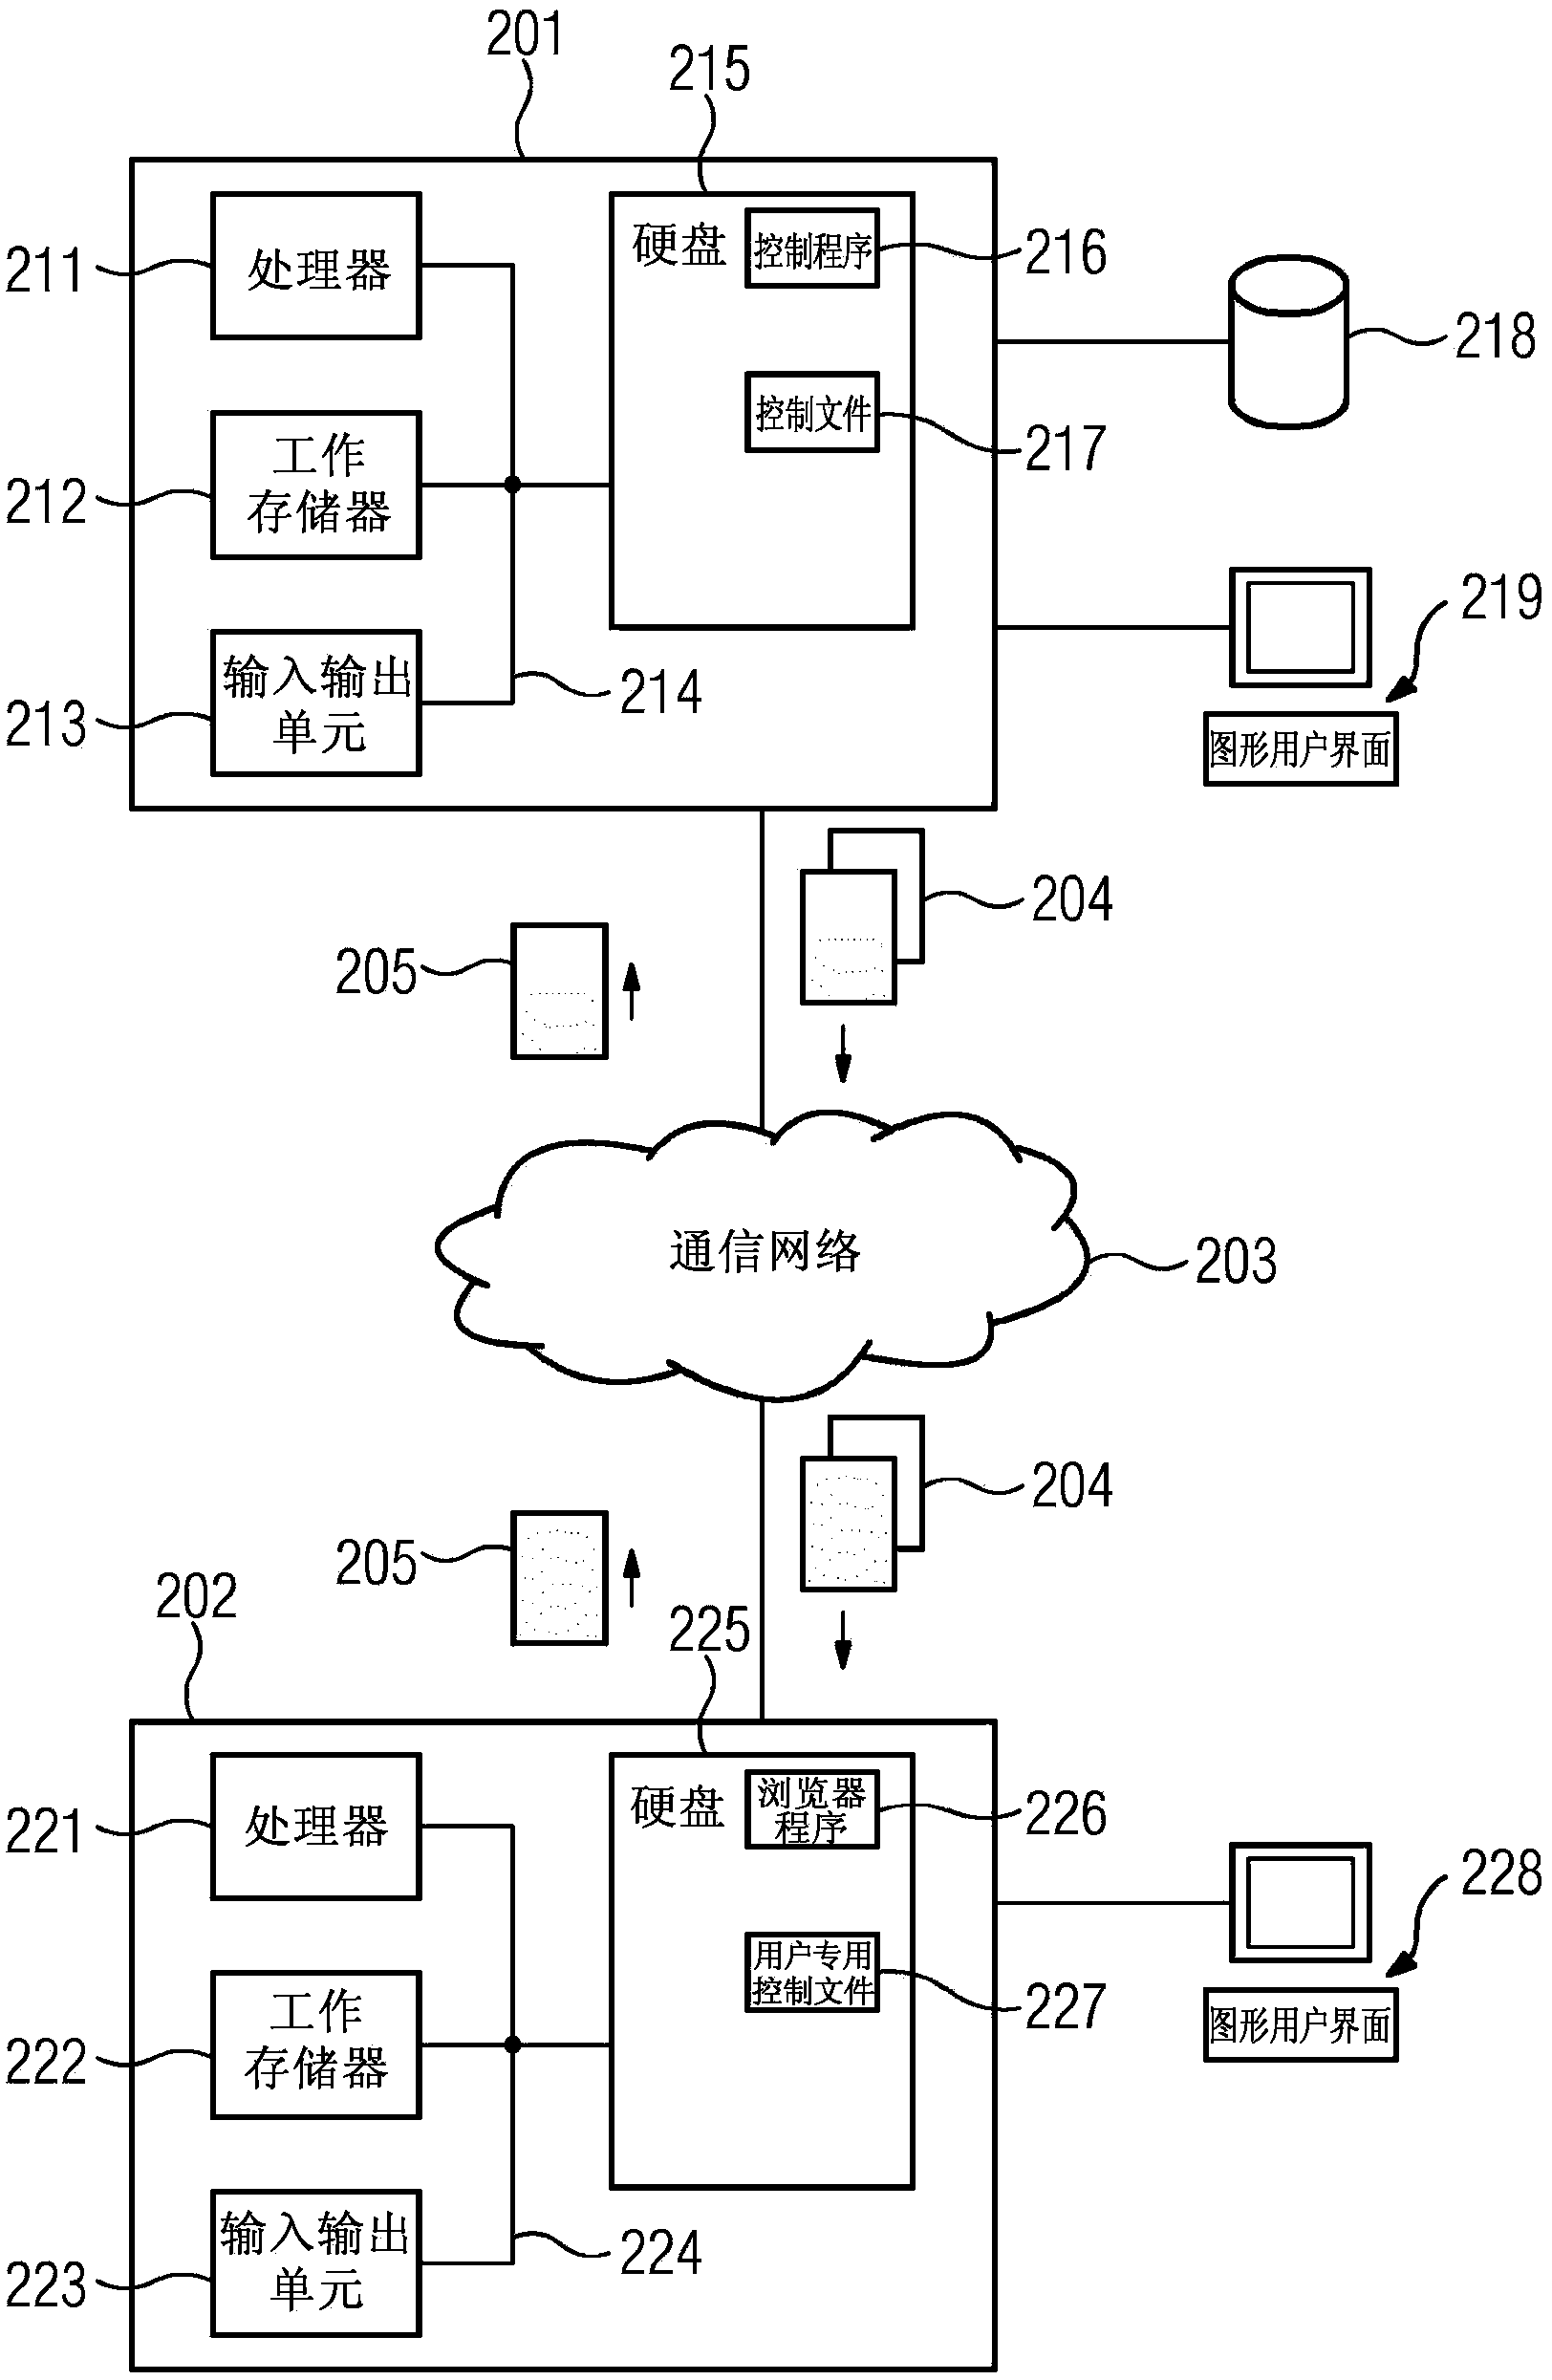 Method for configuring and/or checking the operability of a machine having a gearbox, and control programme